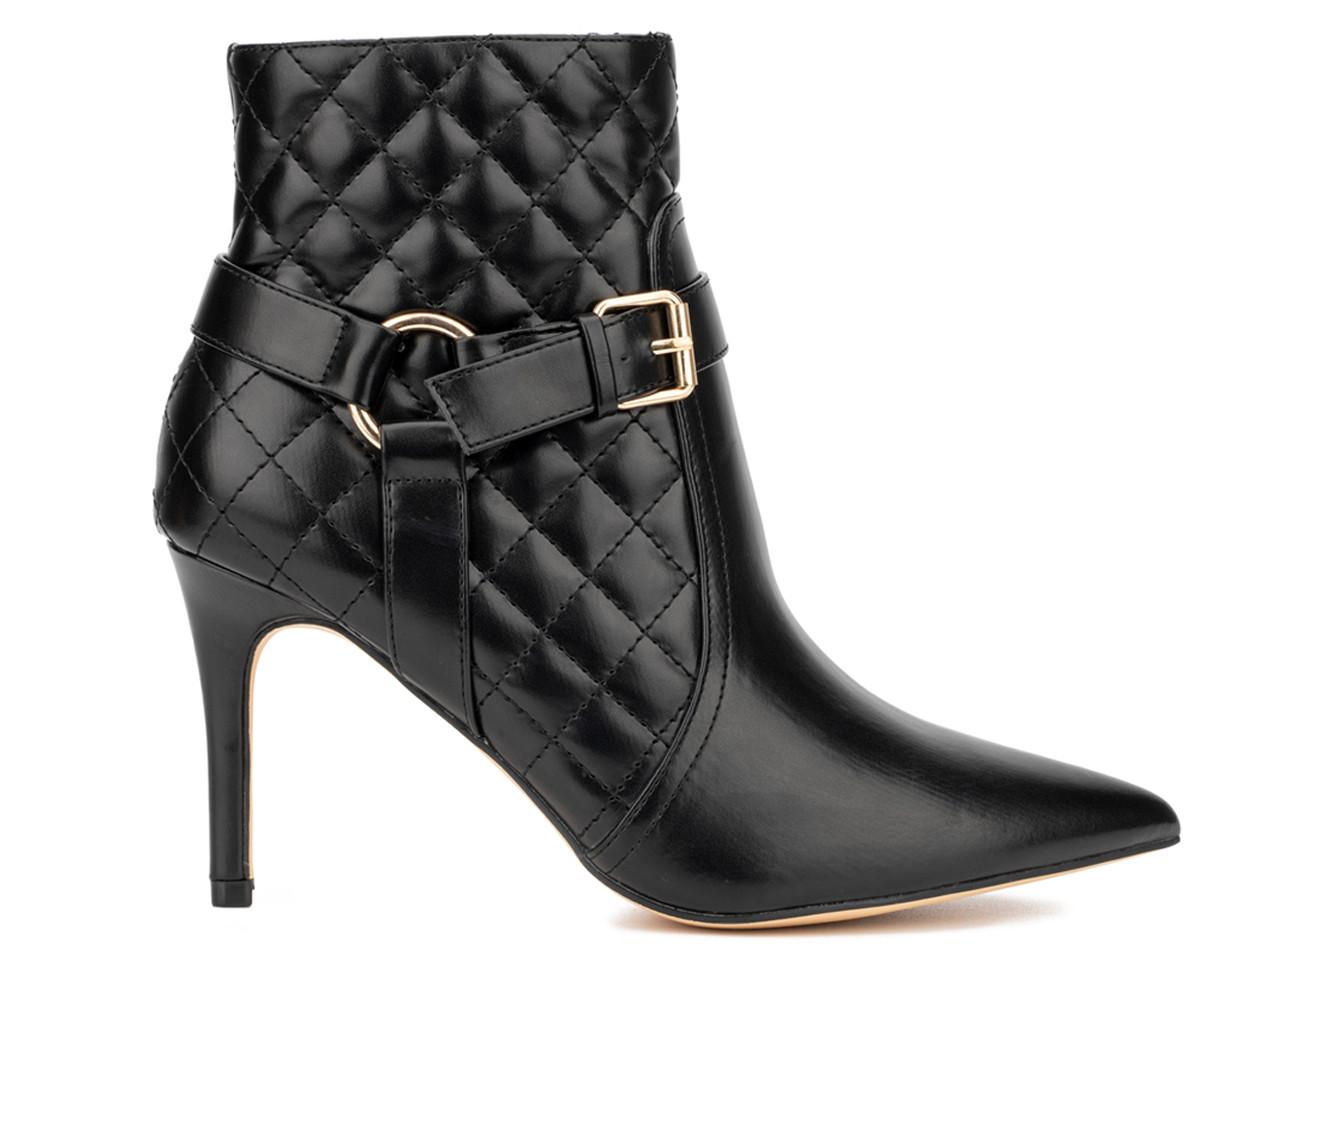 Women's New York and Company Magdalena Heeled Booties